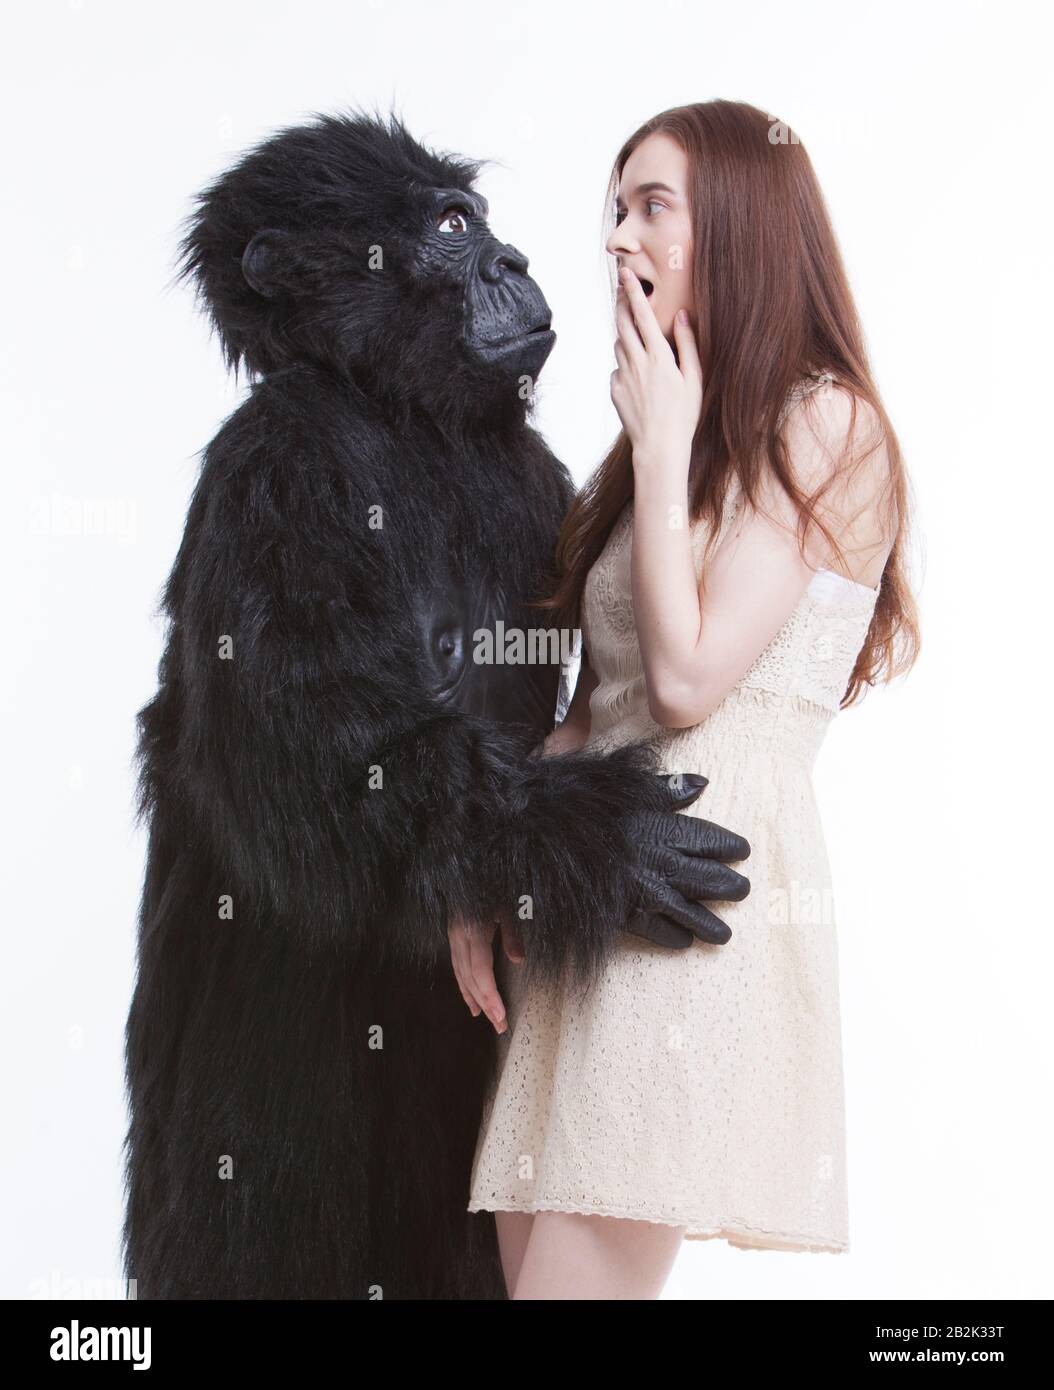 Man in gorilla costume hugging frightened young woman against white background Stock Photo